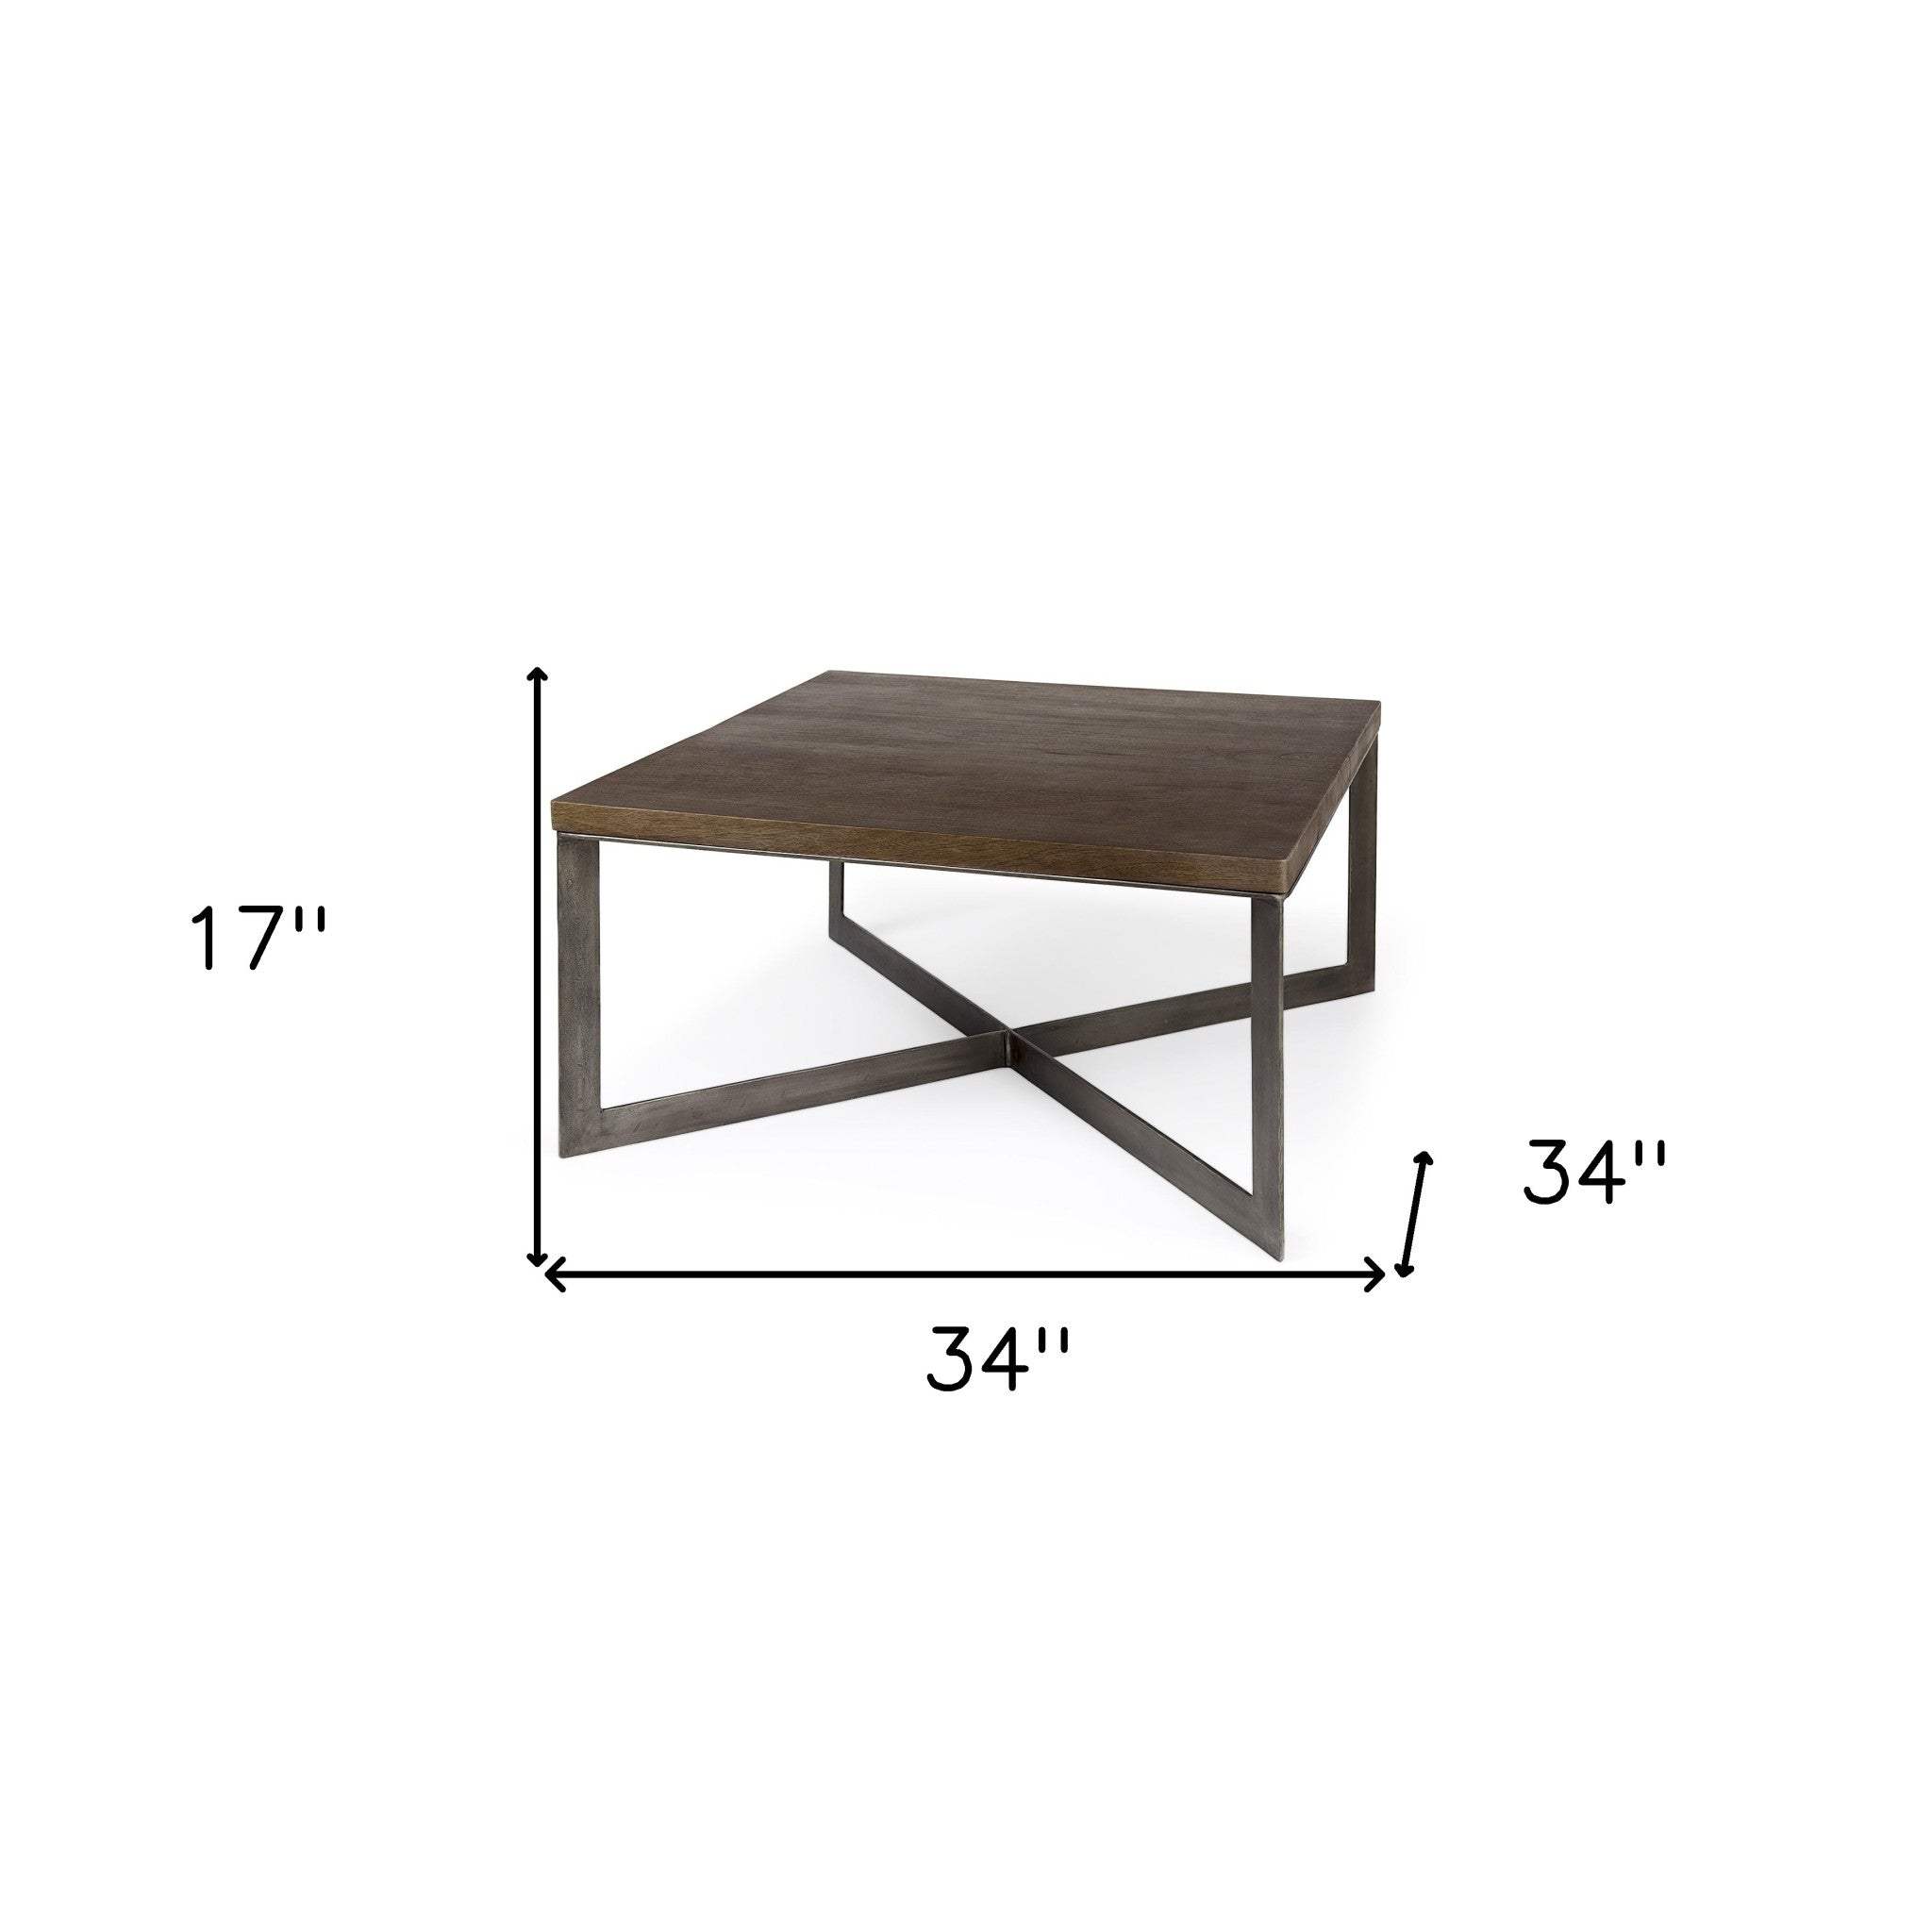 34" Brown Solid Wood Square Coffee Table